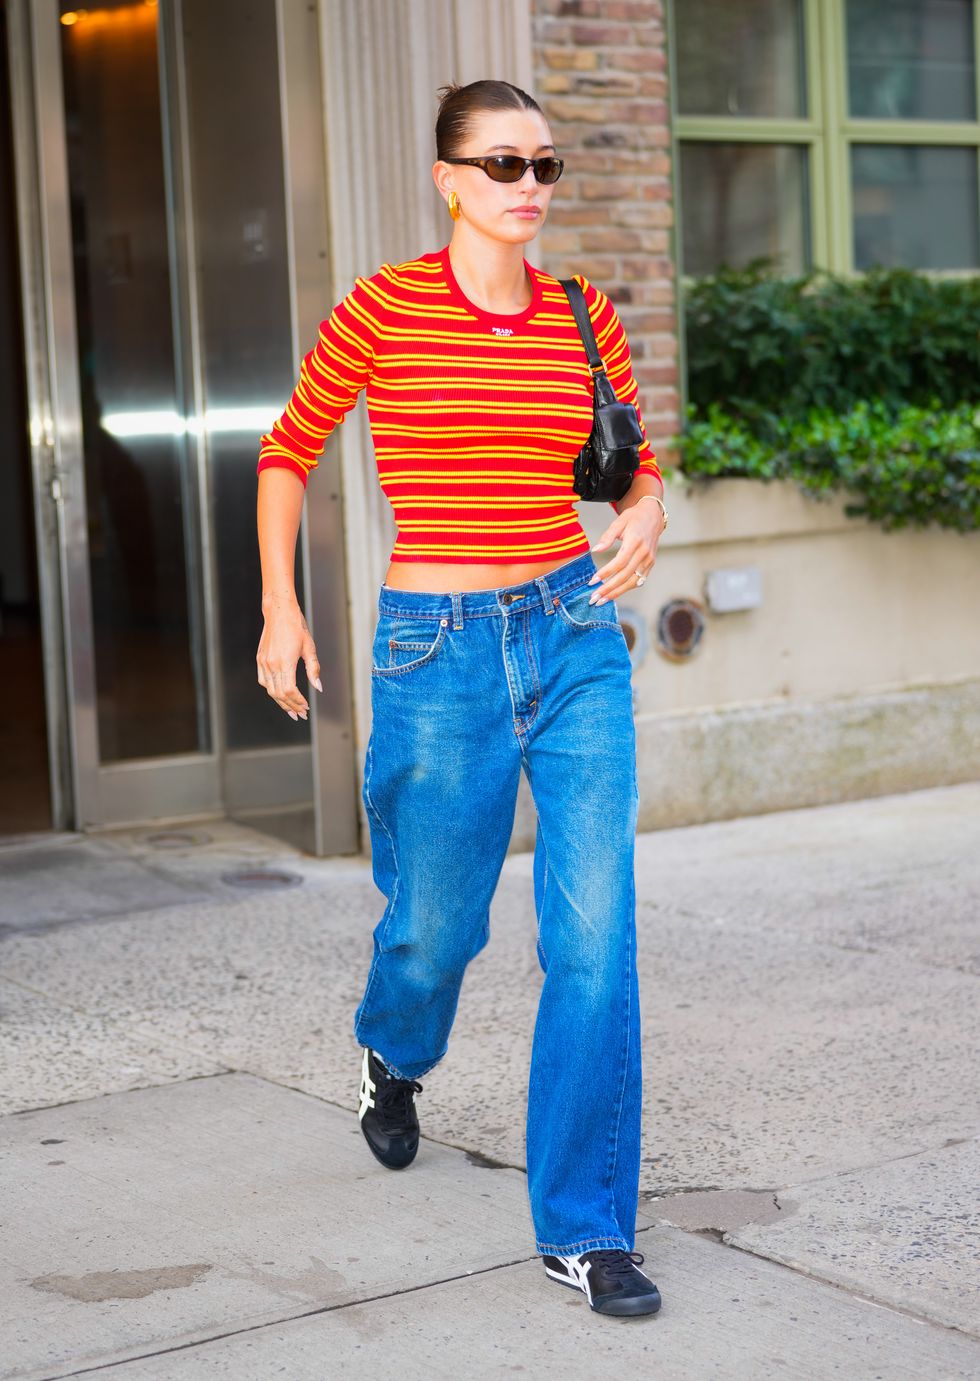 04112023 exclusive hailey bieber is pictured stepping out in new york city the american supermodel wore a bright orange prada crop top, blue jeans, and asics sneakers salestheimagedirectcom please bylinetheimagedirectcomexclusive please email salestheimagedirectcom for fees before use